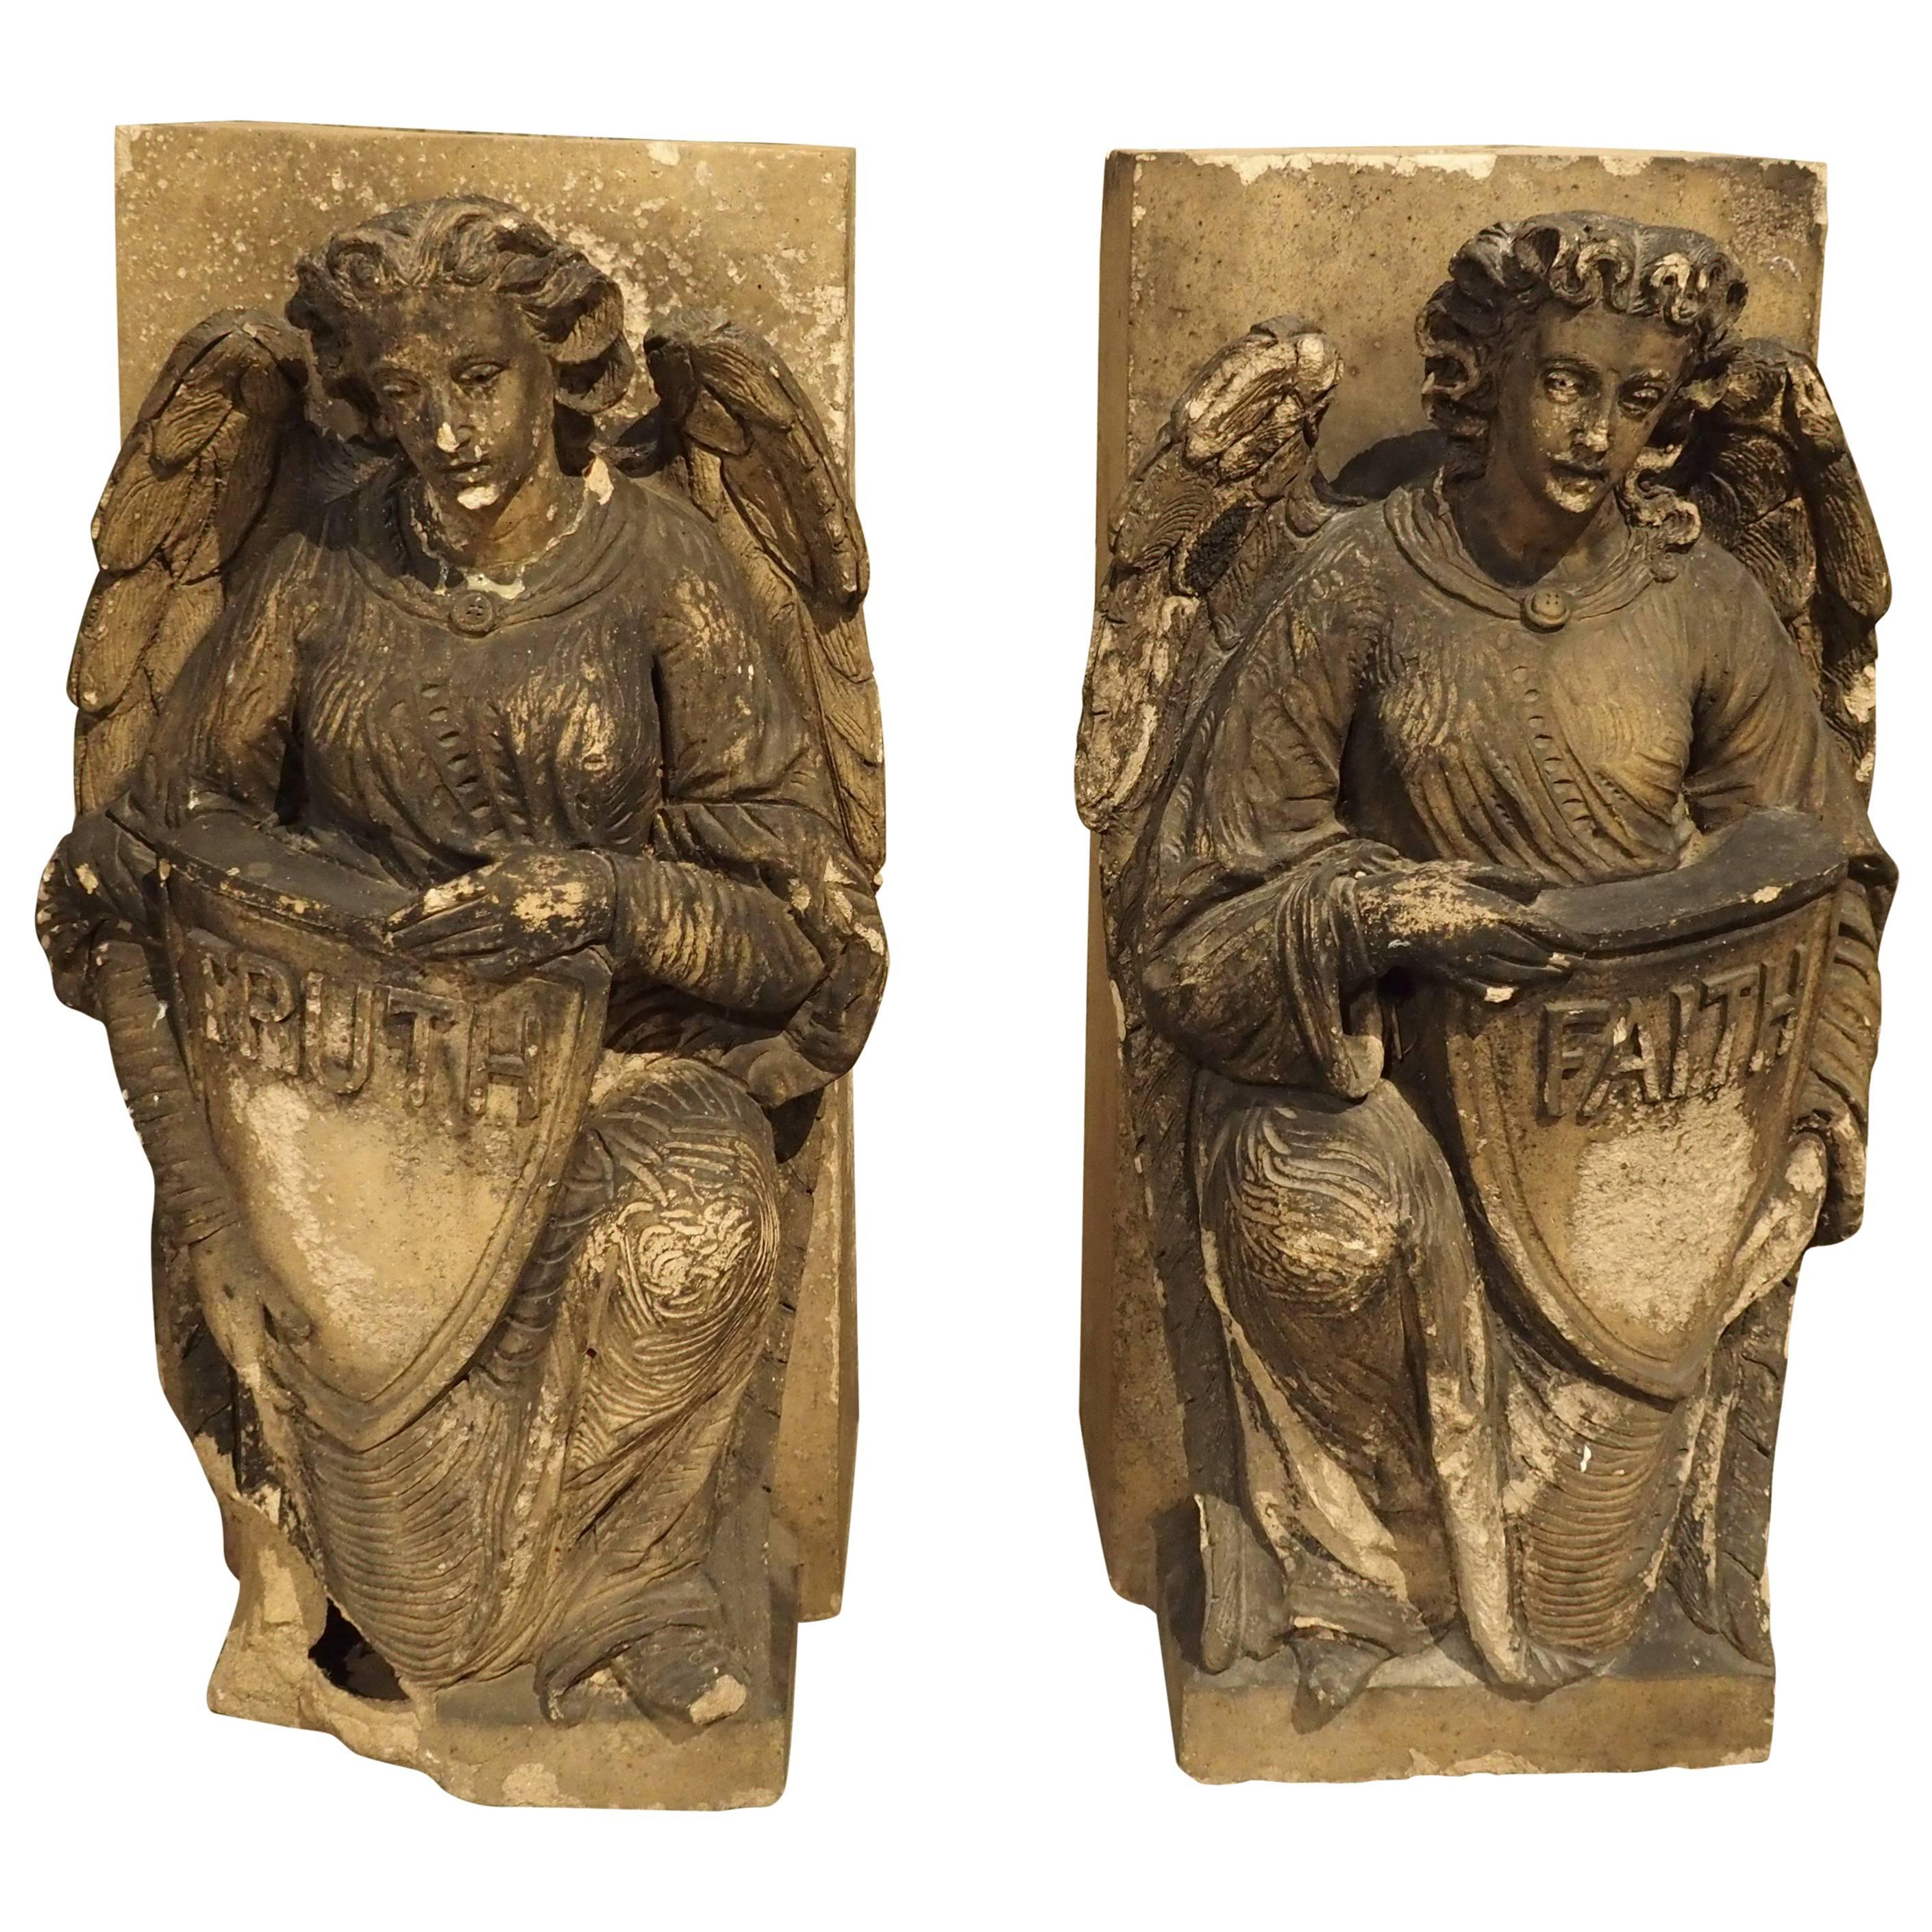 Pair of Antique Terra Cotta Building Ornaments from England, circa 1820